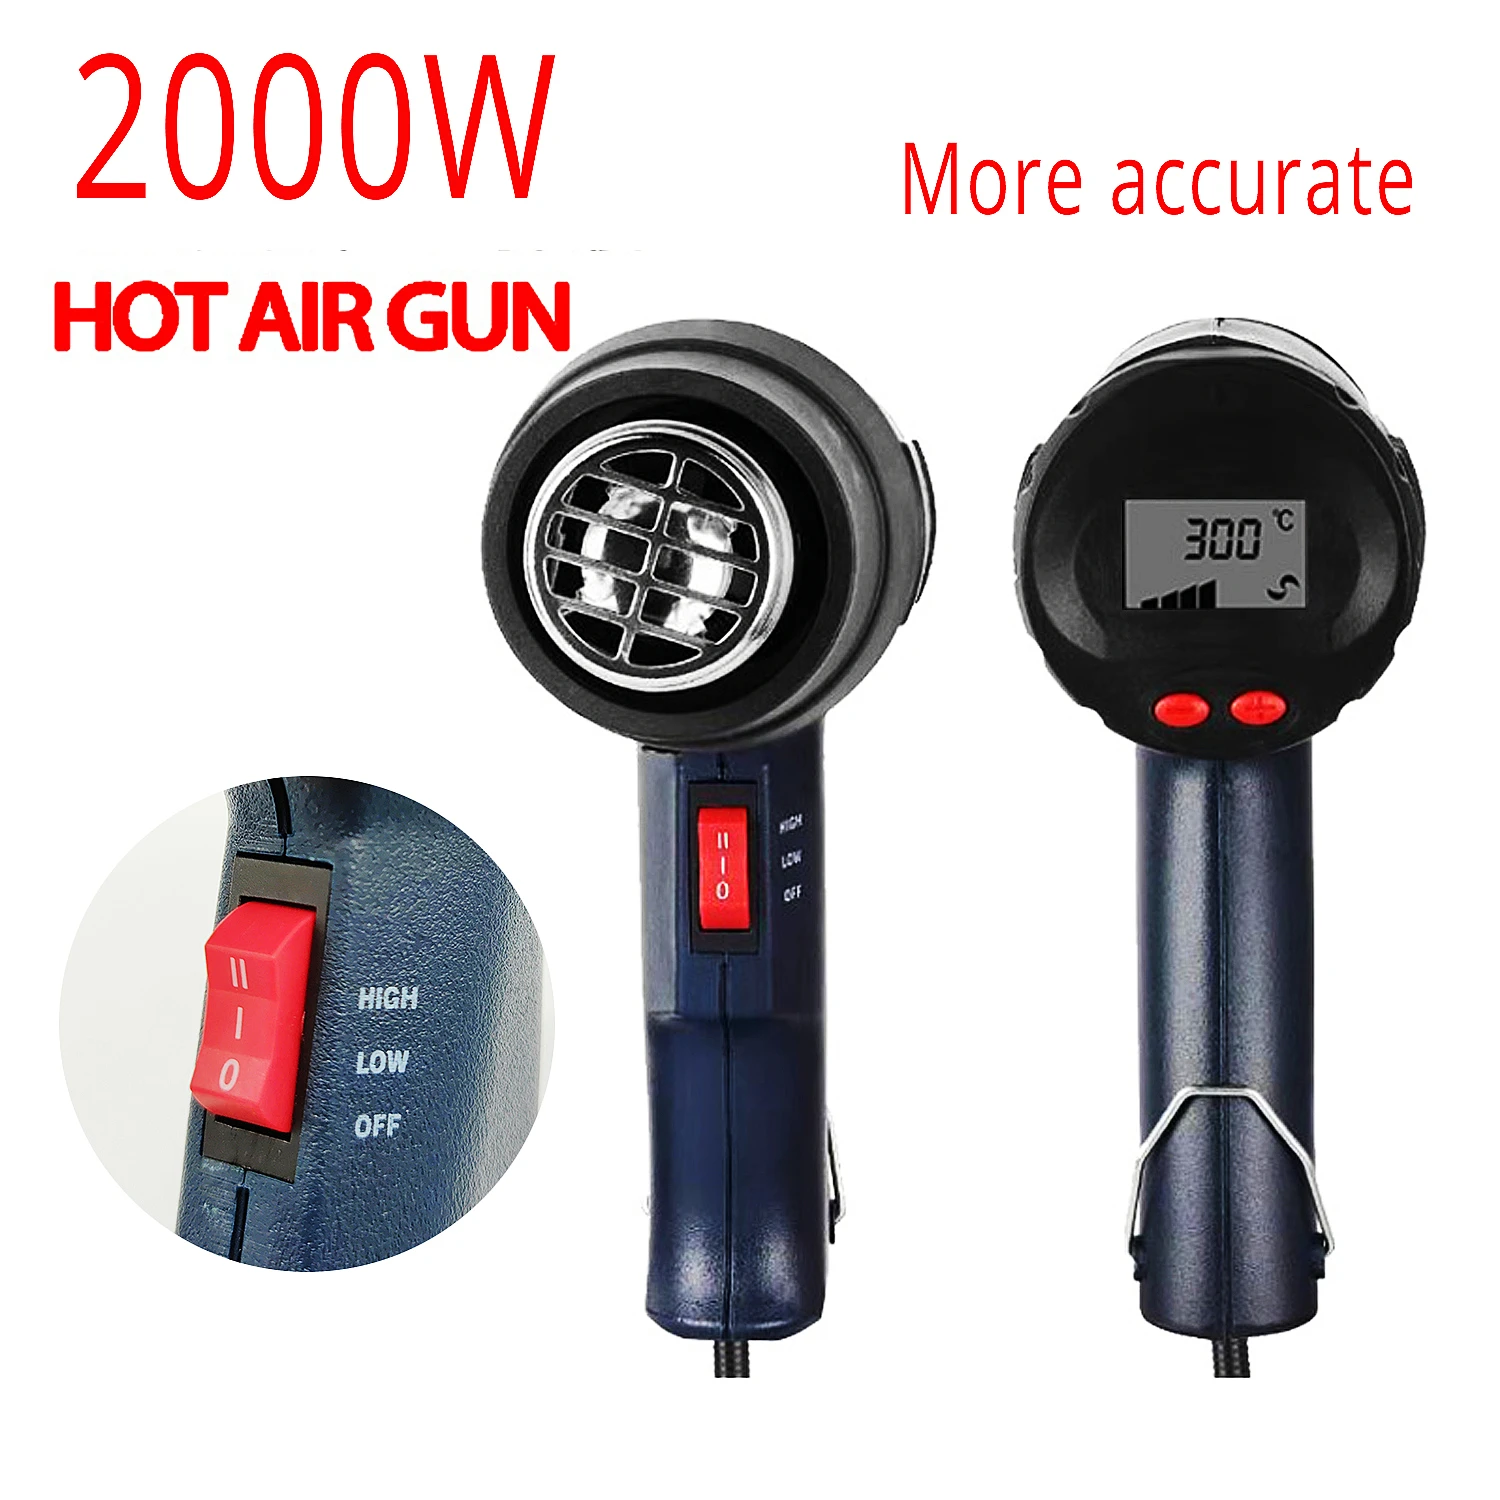 2000W 220V Hot Air Gun Industrial Electric Air Rifle Gun Thermoregulator LCD Heat Guns Shrink Wrapping Thermal Heater Nozzle best home paint sprayer Power Tools